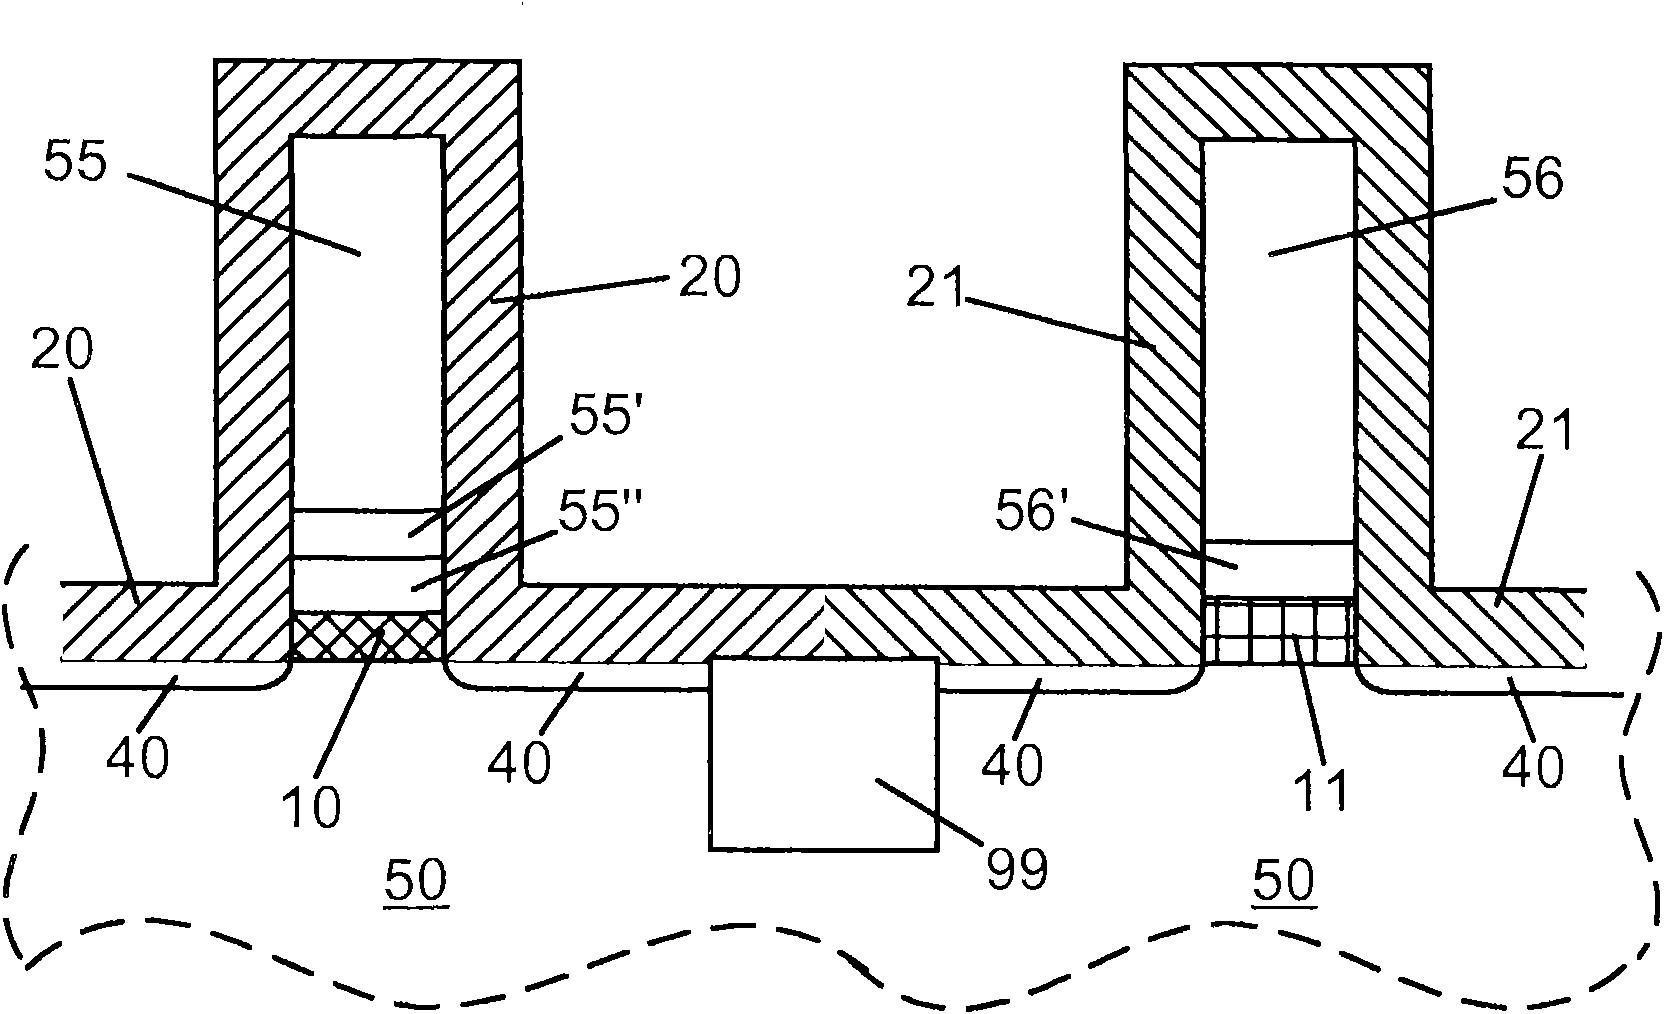 CMOS circuits with high-k gate dielectric